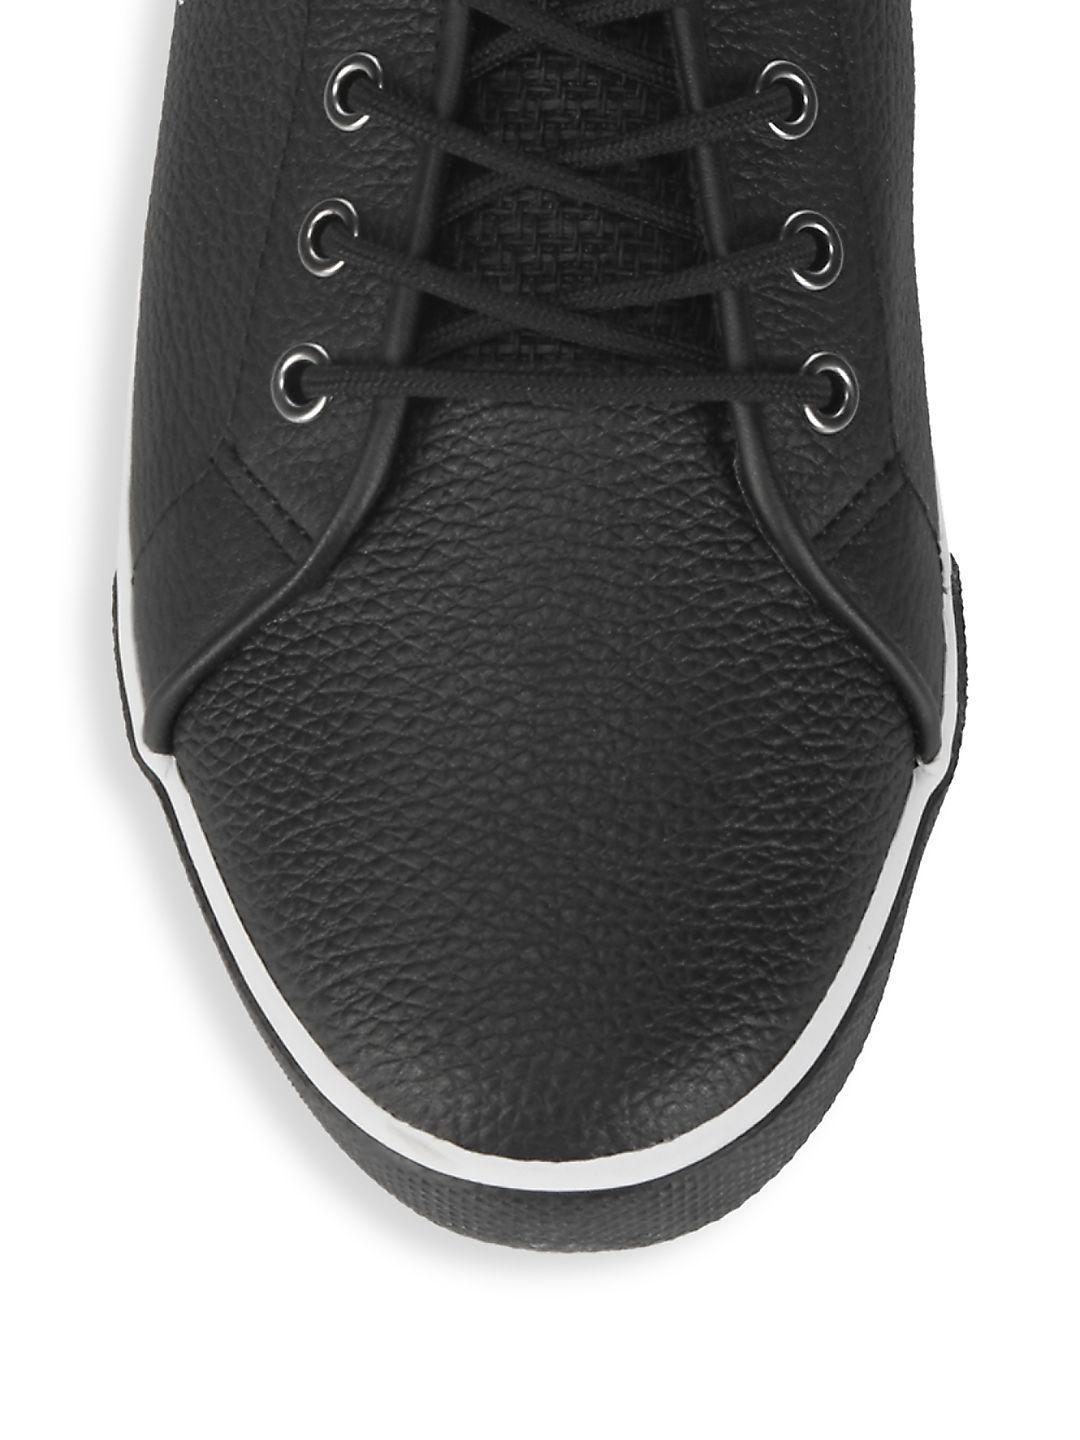 Fred Perry Kingston Marshall Leather Sneakers in White for Men - Lyst